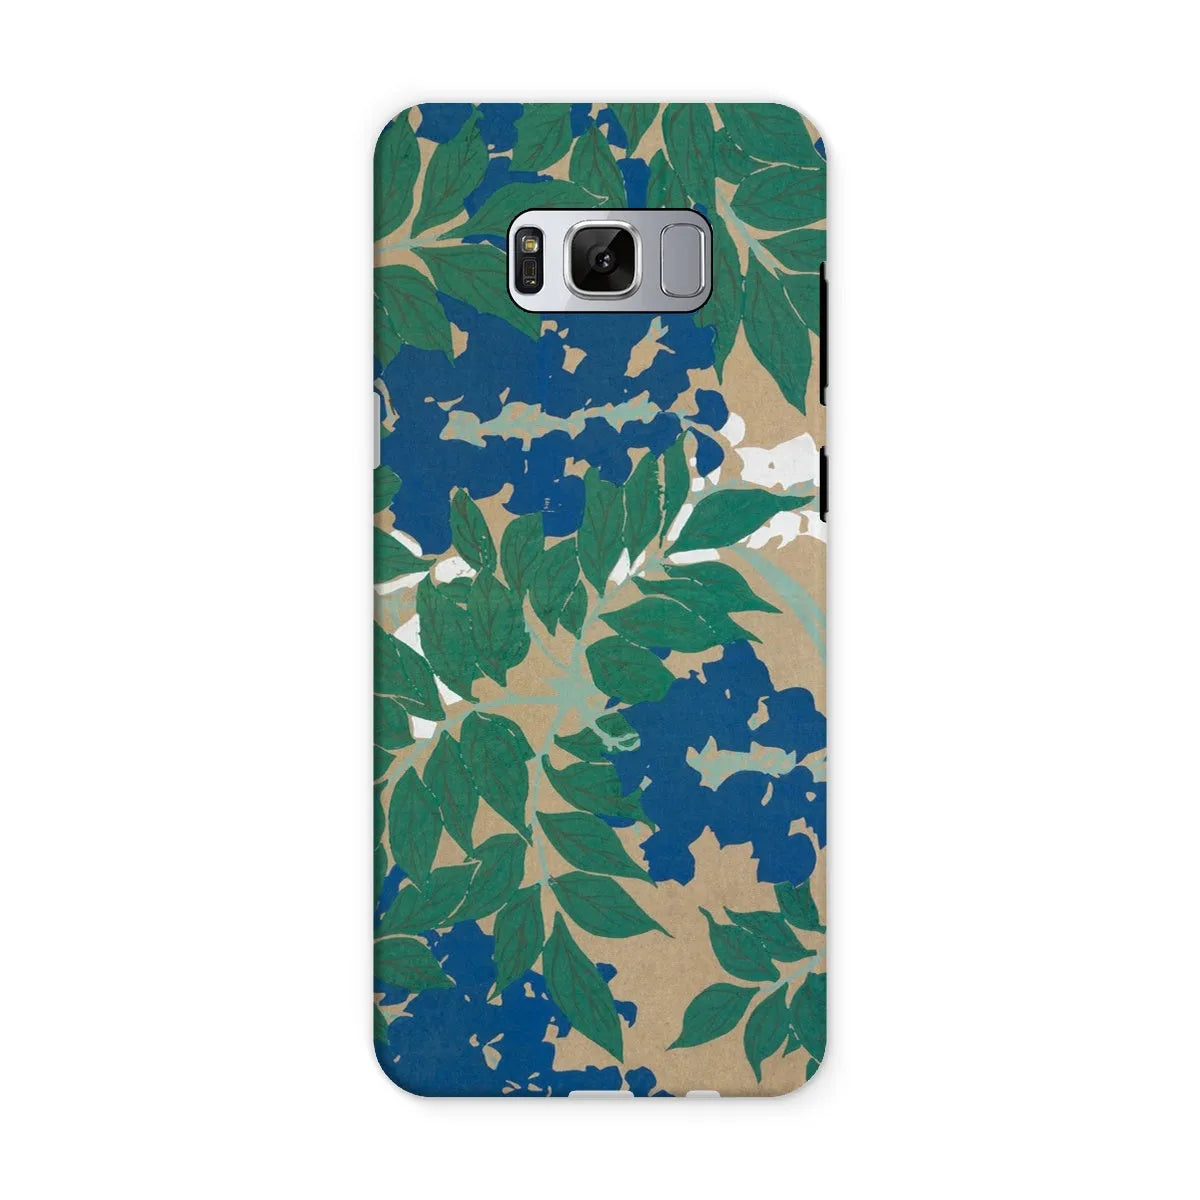 Wisteria From Momoyogusa - Floral Phone Case - Kamisaka Sekka - Samsung Galaxy S8 / Matte - Mobile Phone Cases